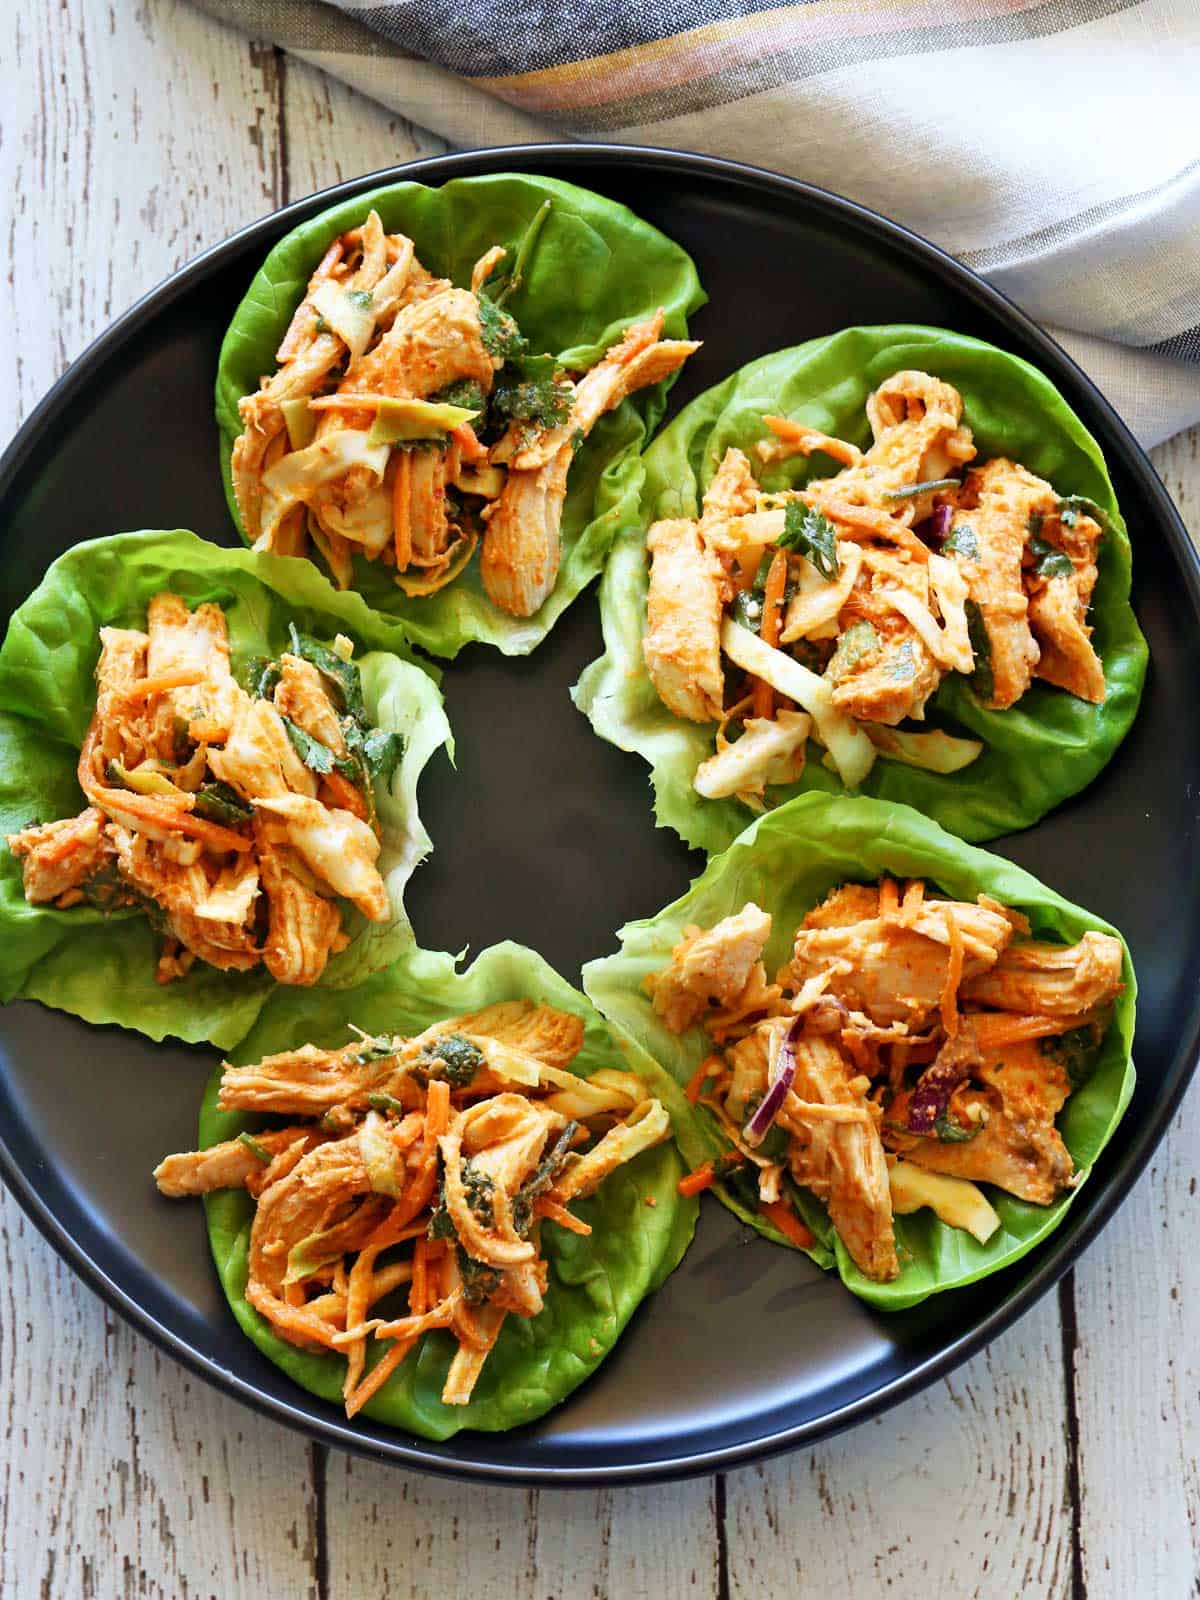 Thai chicken salad is served in lettuce cups.